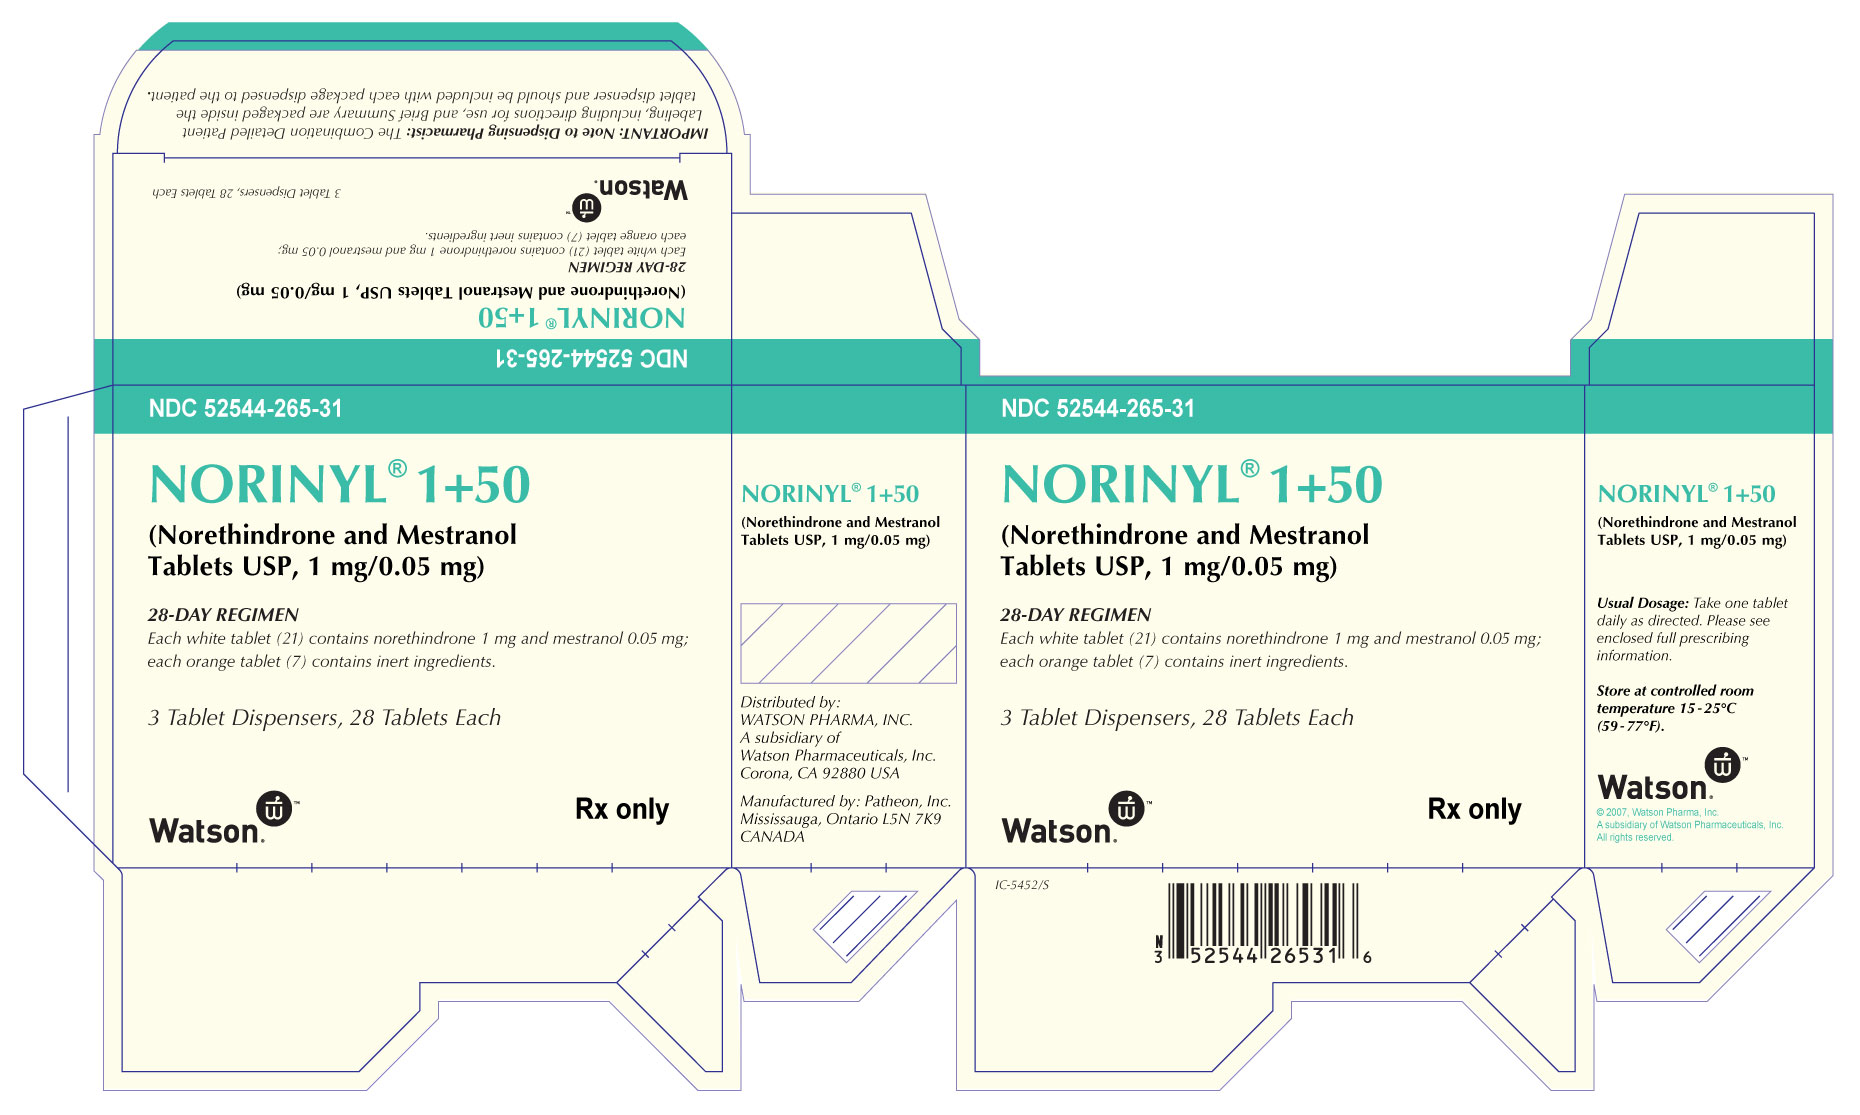 NORINYL® 1+50 (Norethindrone and Mestranol Tablets USP, 1mg/0.05 mg NDC 52544-265-31 Carton x 3 - 28 Tablet Dispensers